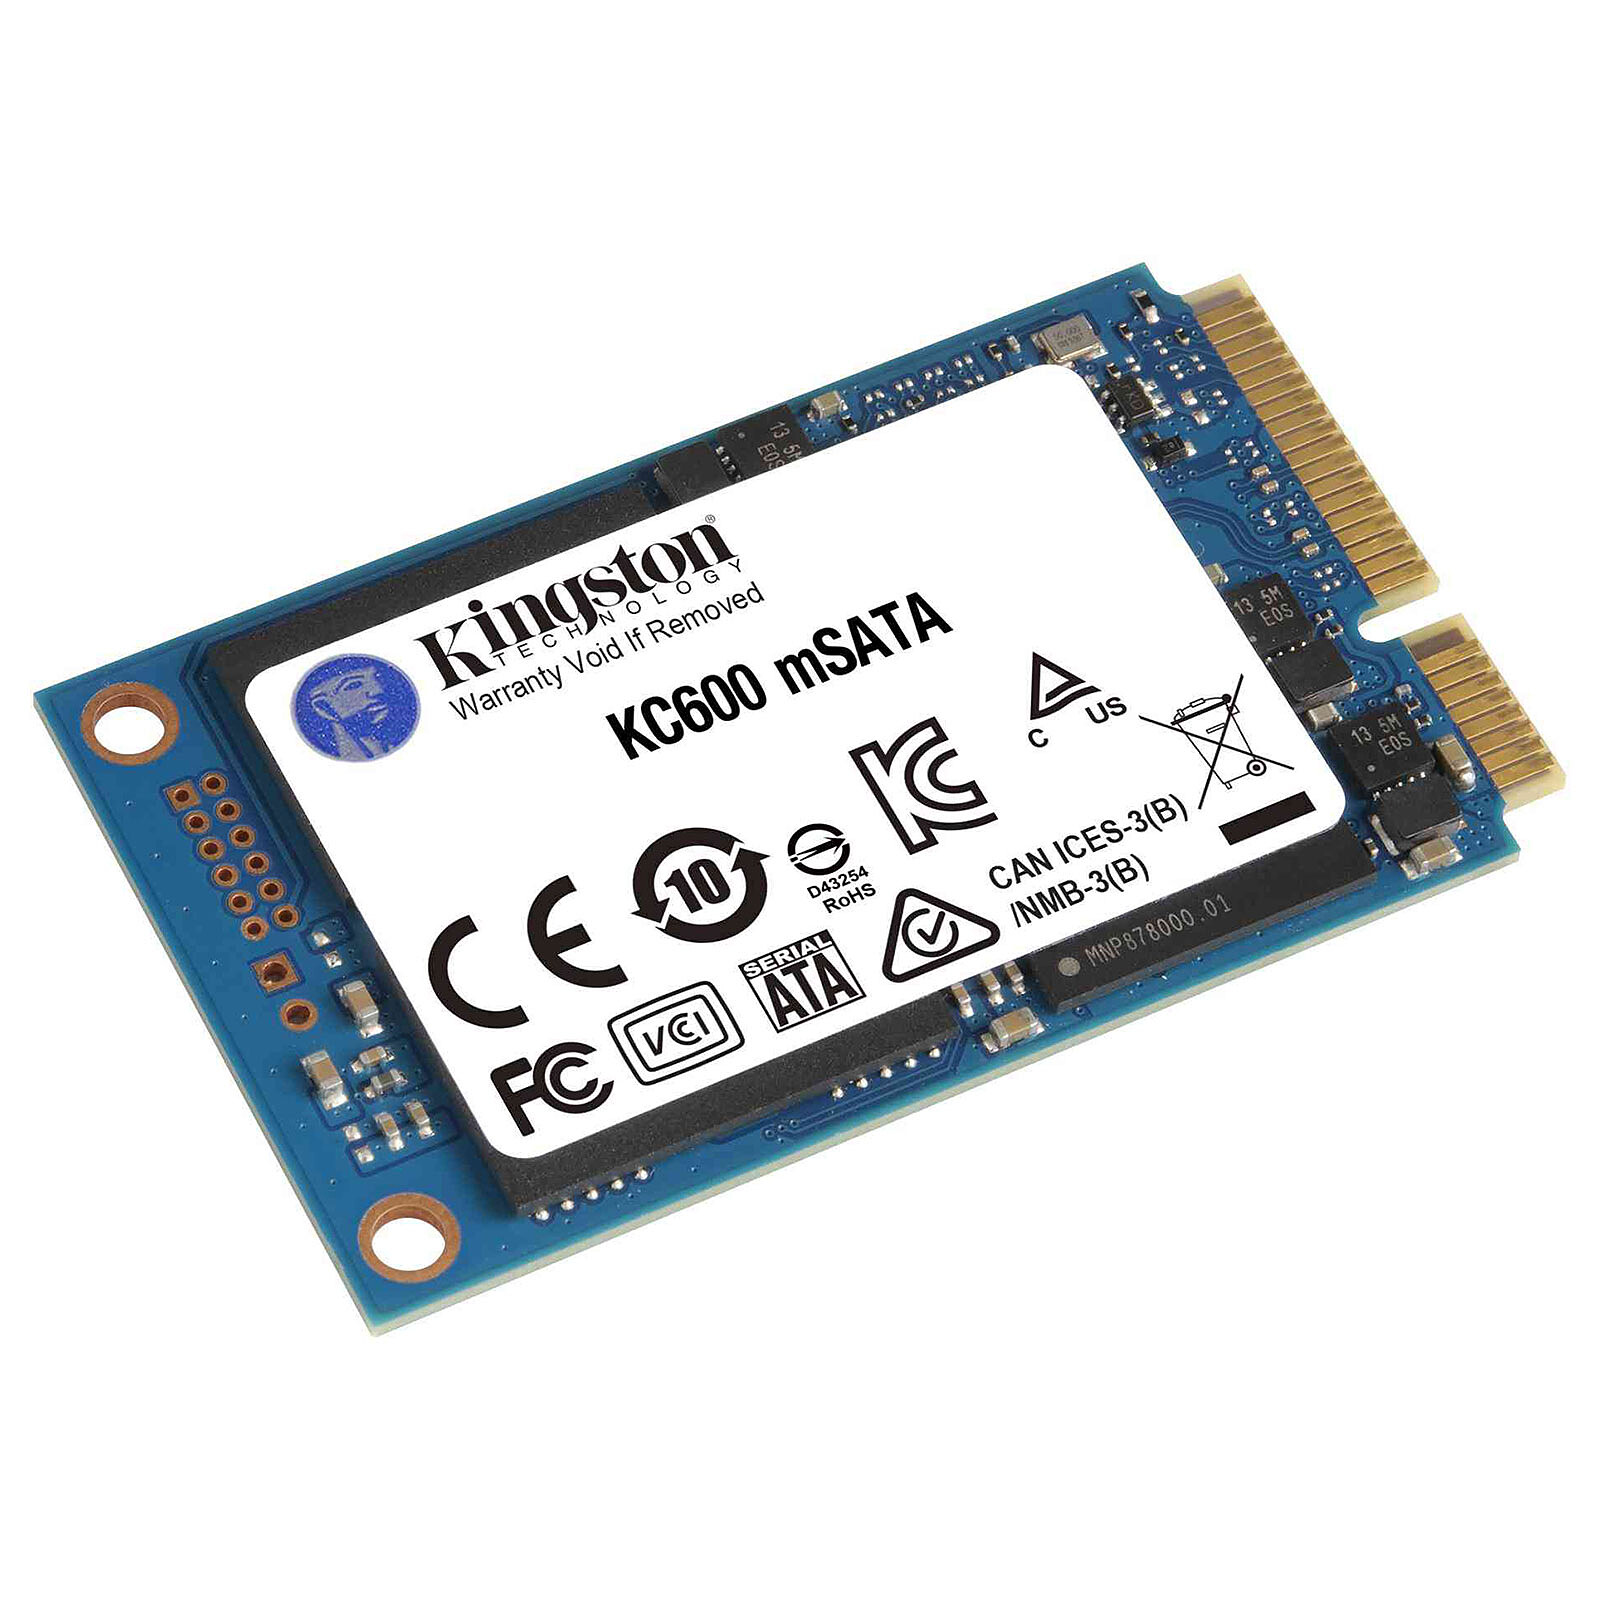 Kingston SSD NV2 1 To - Disque SSD - LDLC